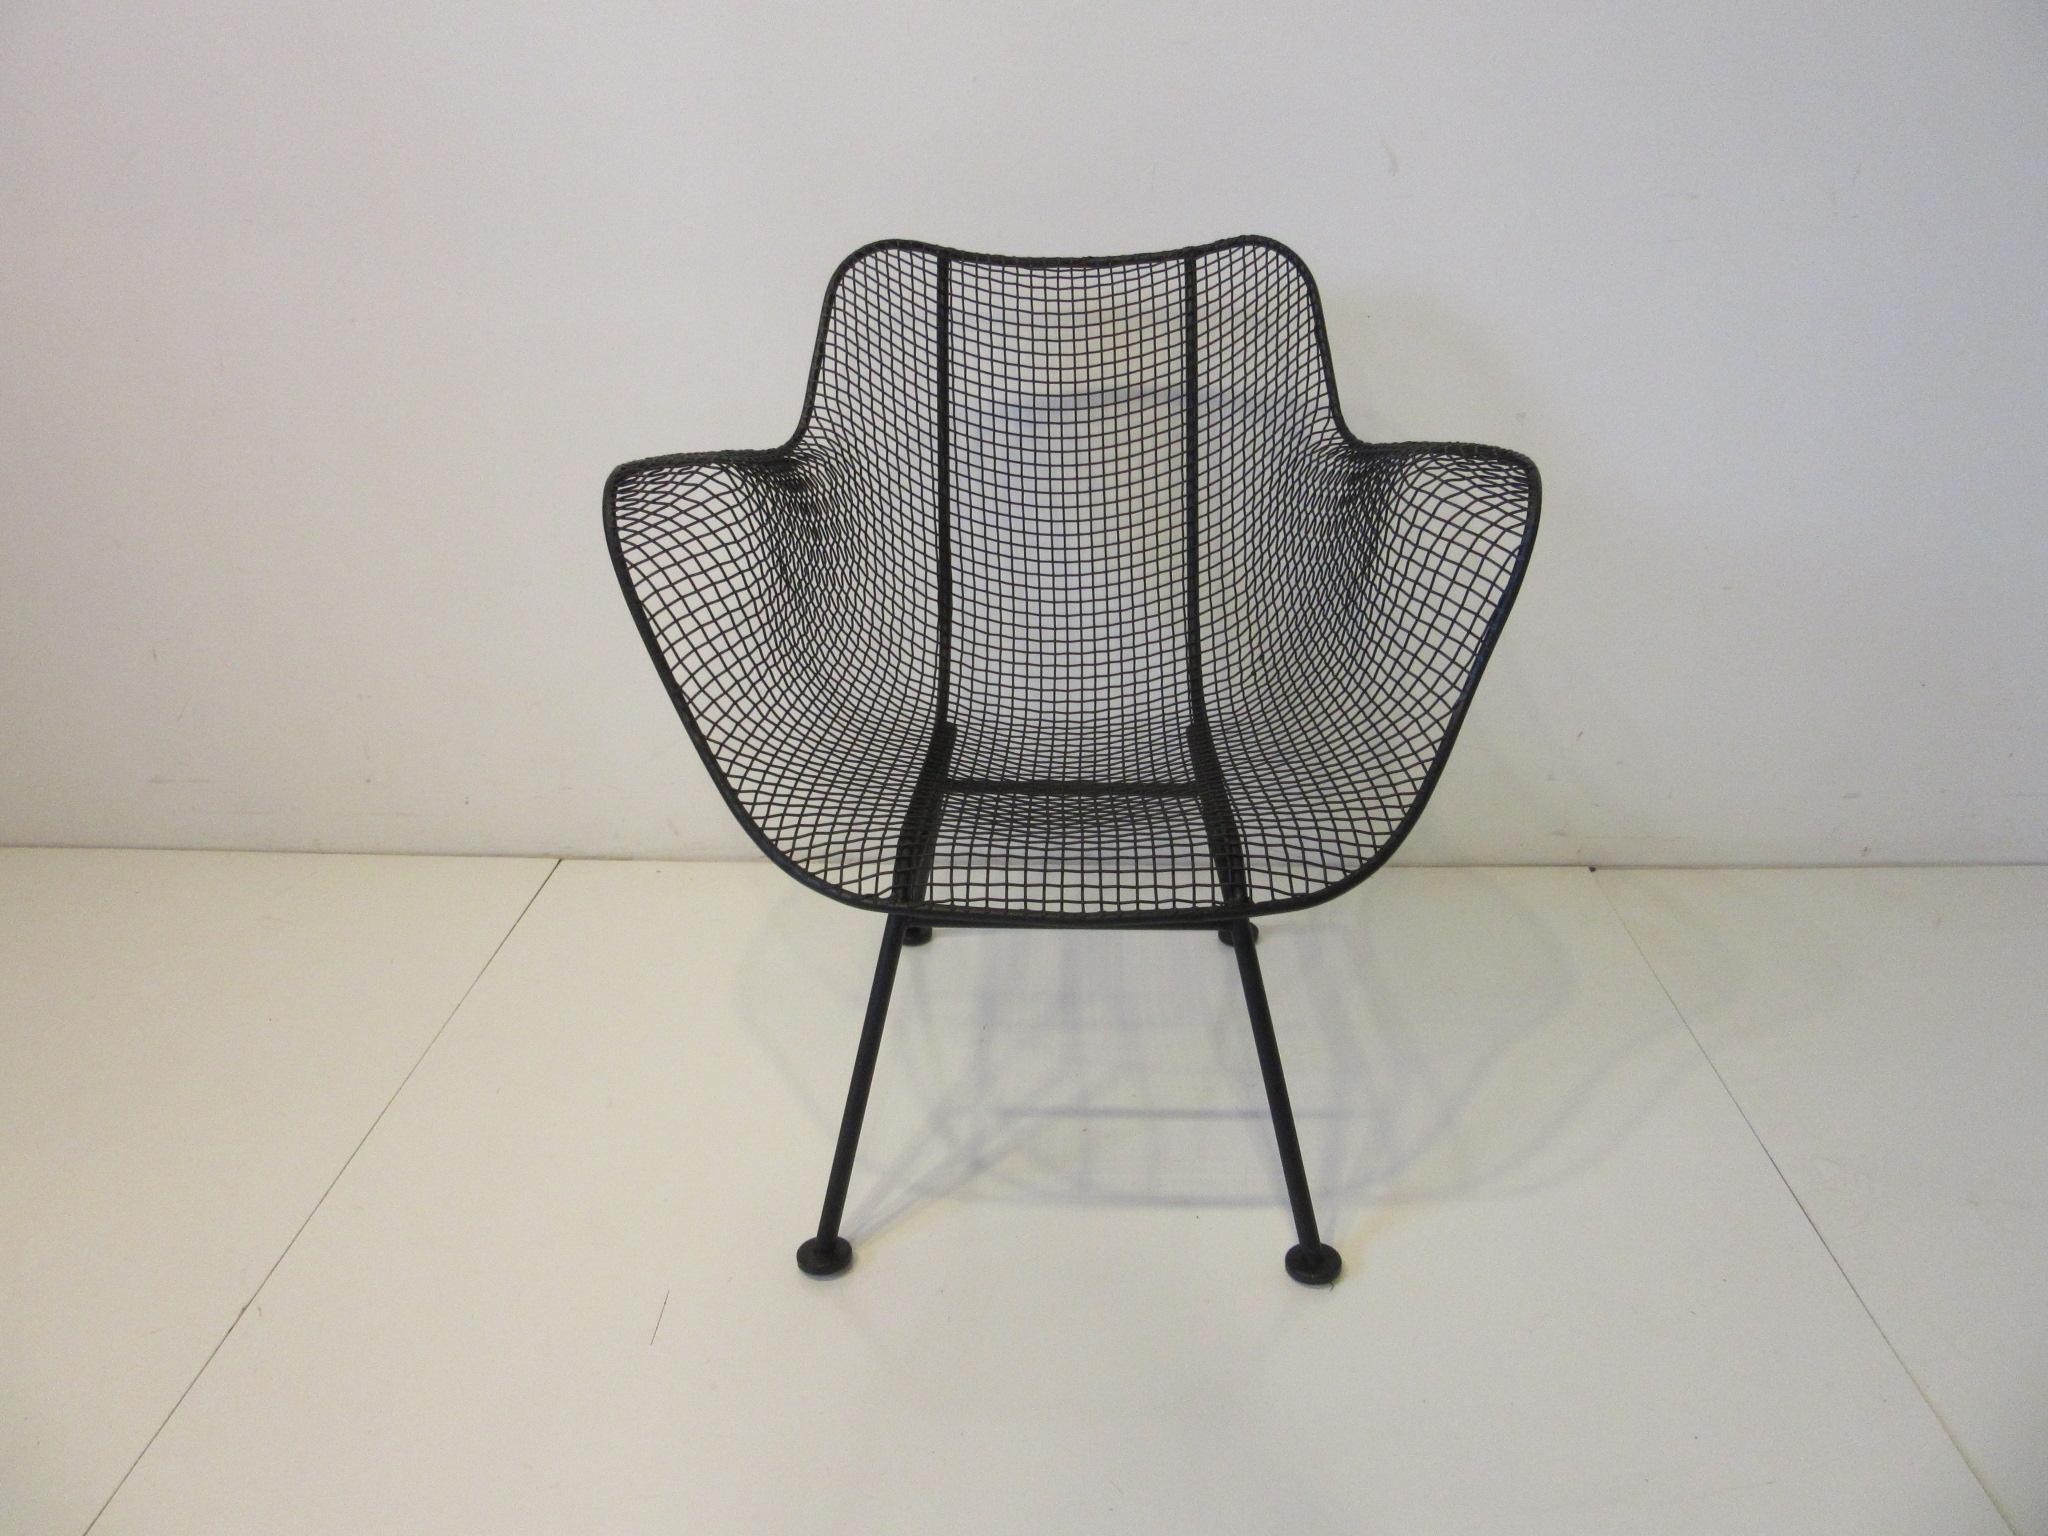 A pair of molded wire mesh armchairs in a satin black finish, the chairs are in the lower lounge height for comfort. The pair have been professionally restored dipped, primed and painted for the next owner to enjoy indoors, outdoors or a three